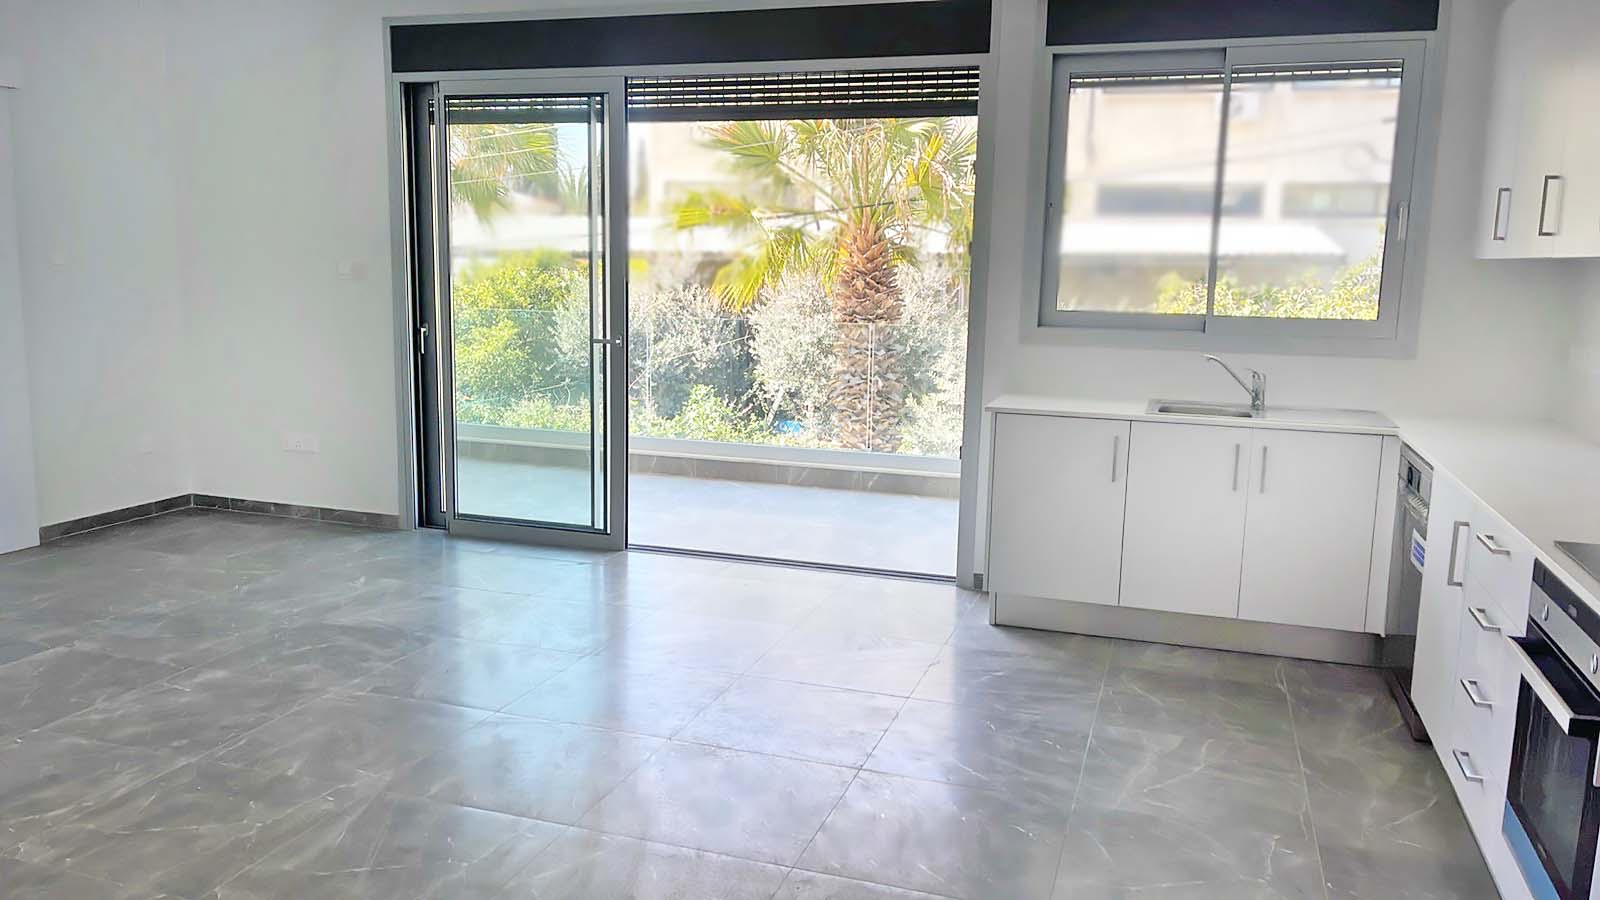 3 Bedroom Apartment for Sale in Strovolos – Archangelos, Nicosia District